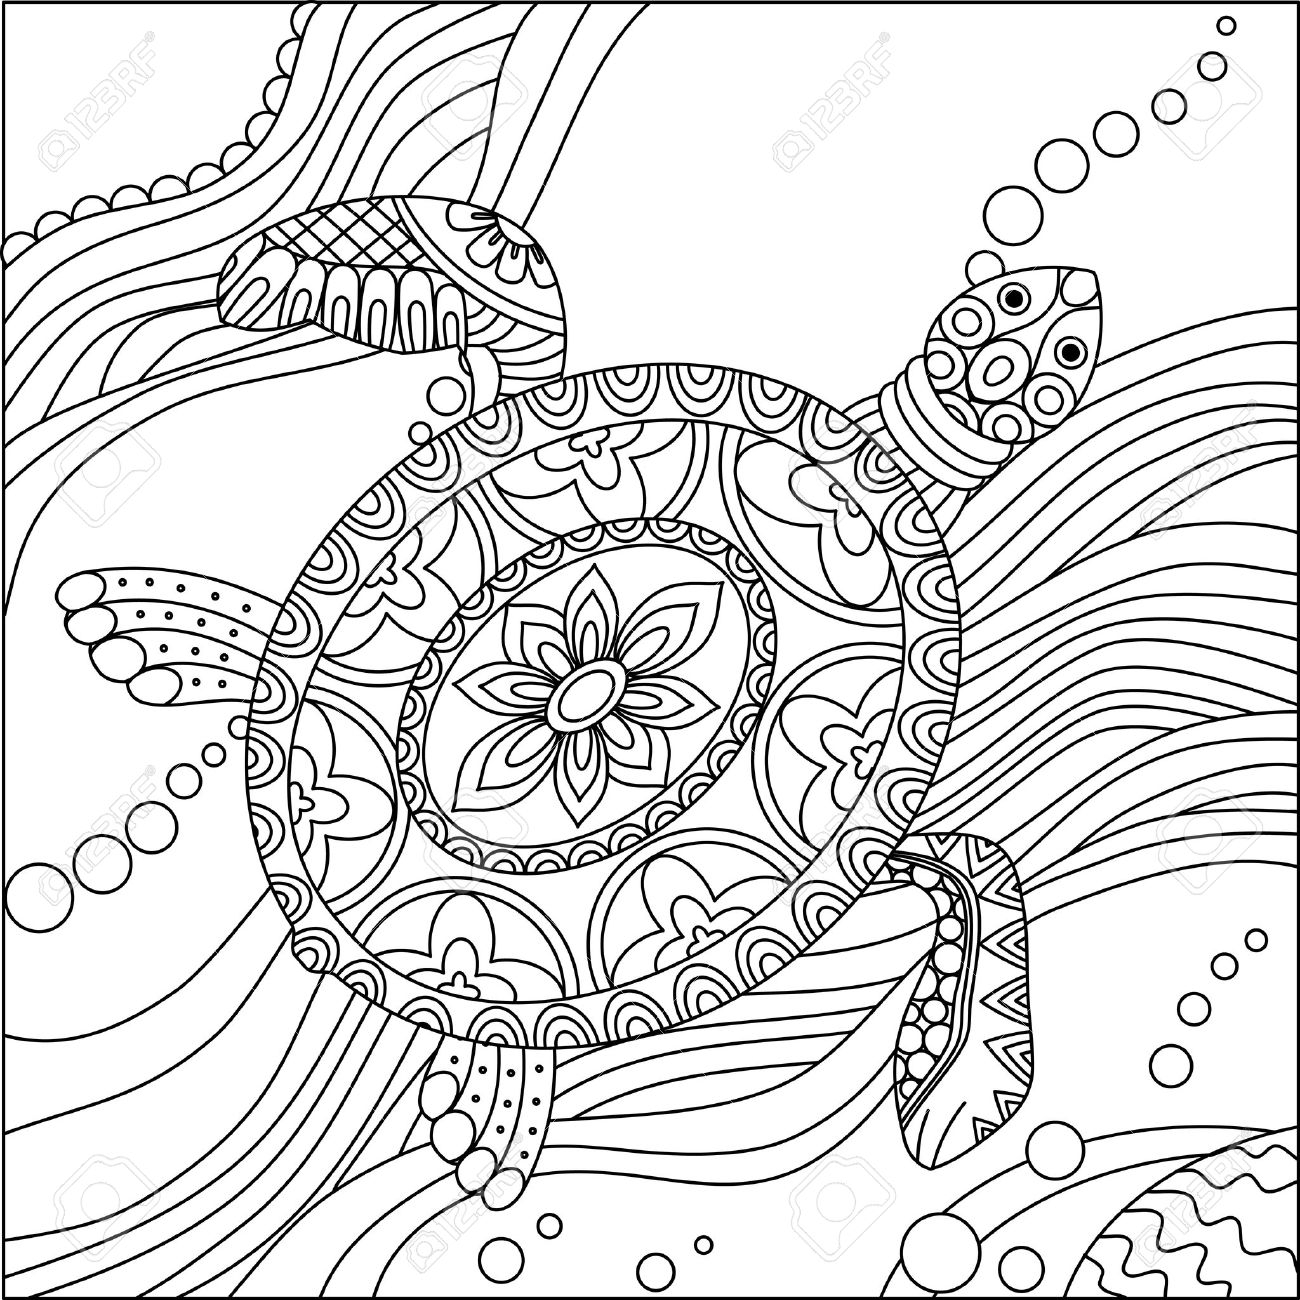 Sea Turtle Coloring Pages For Adults at GetColorings.com | Free